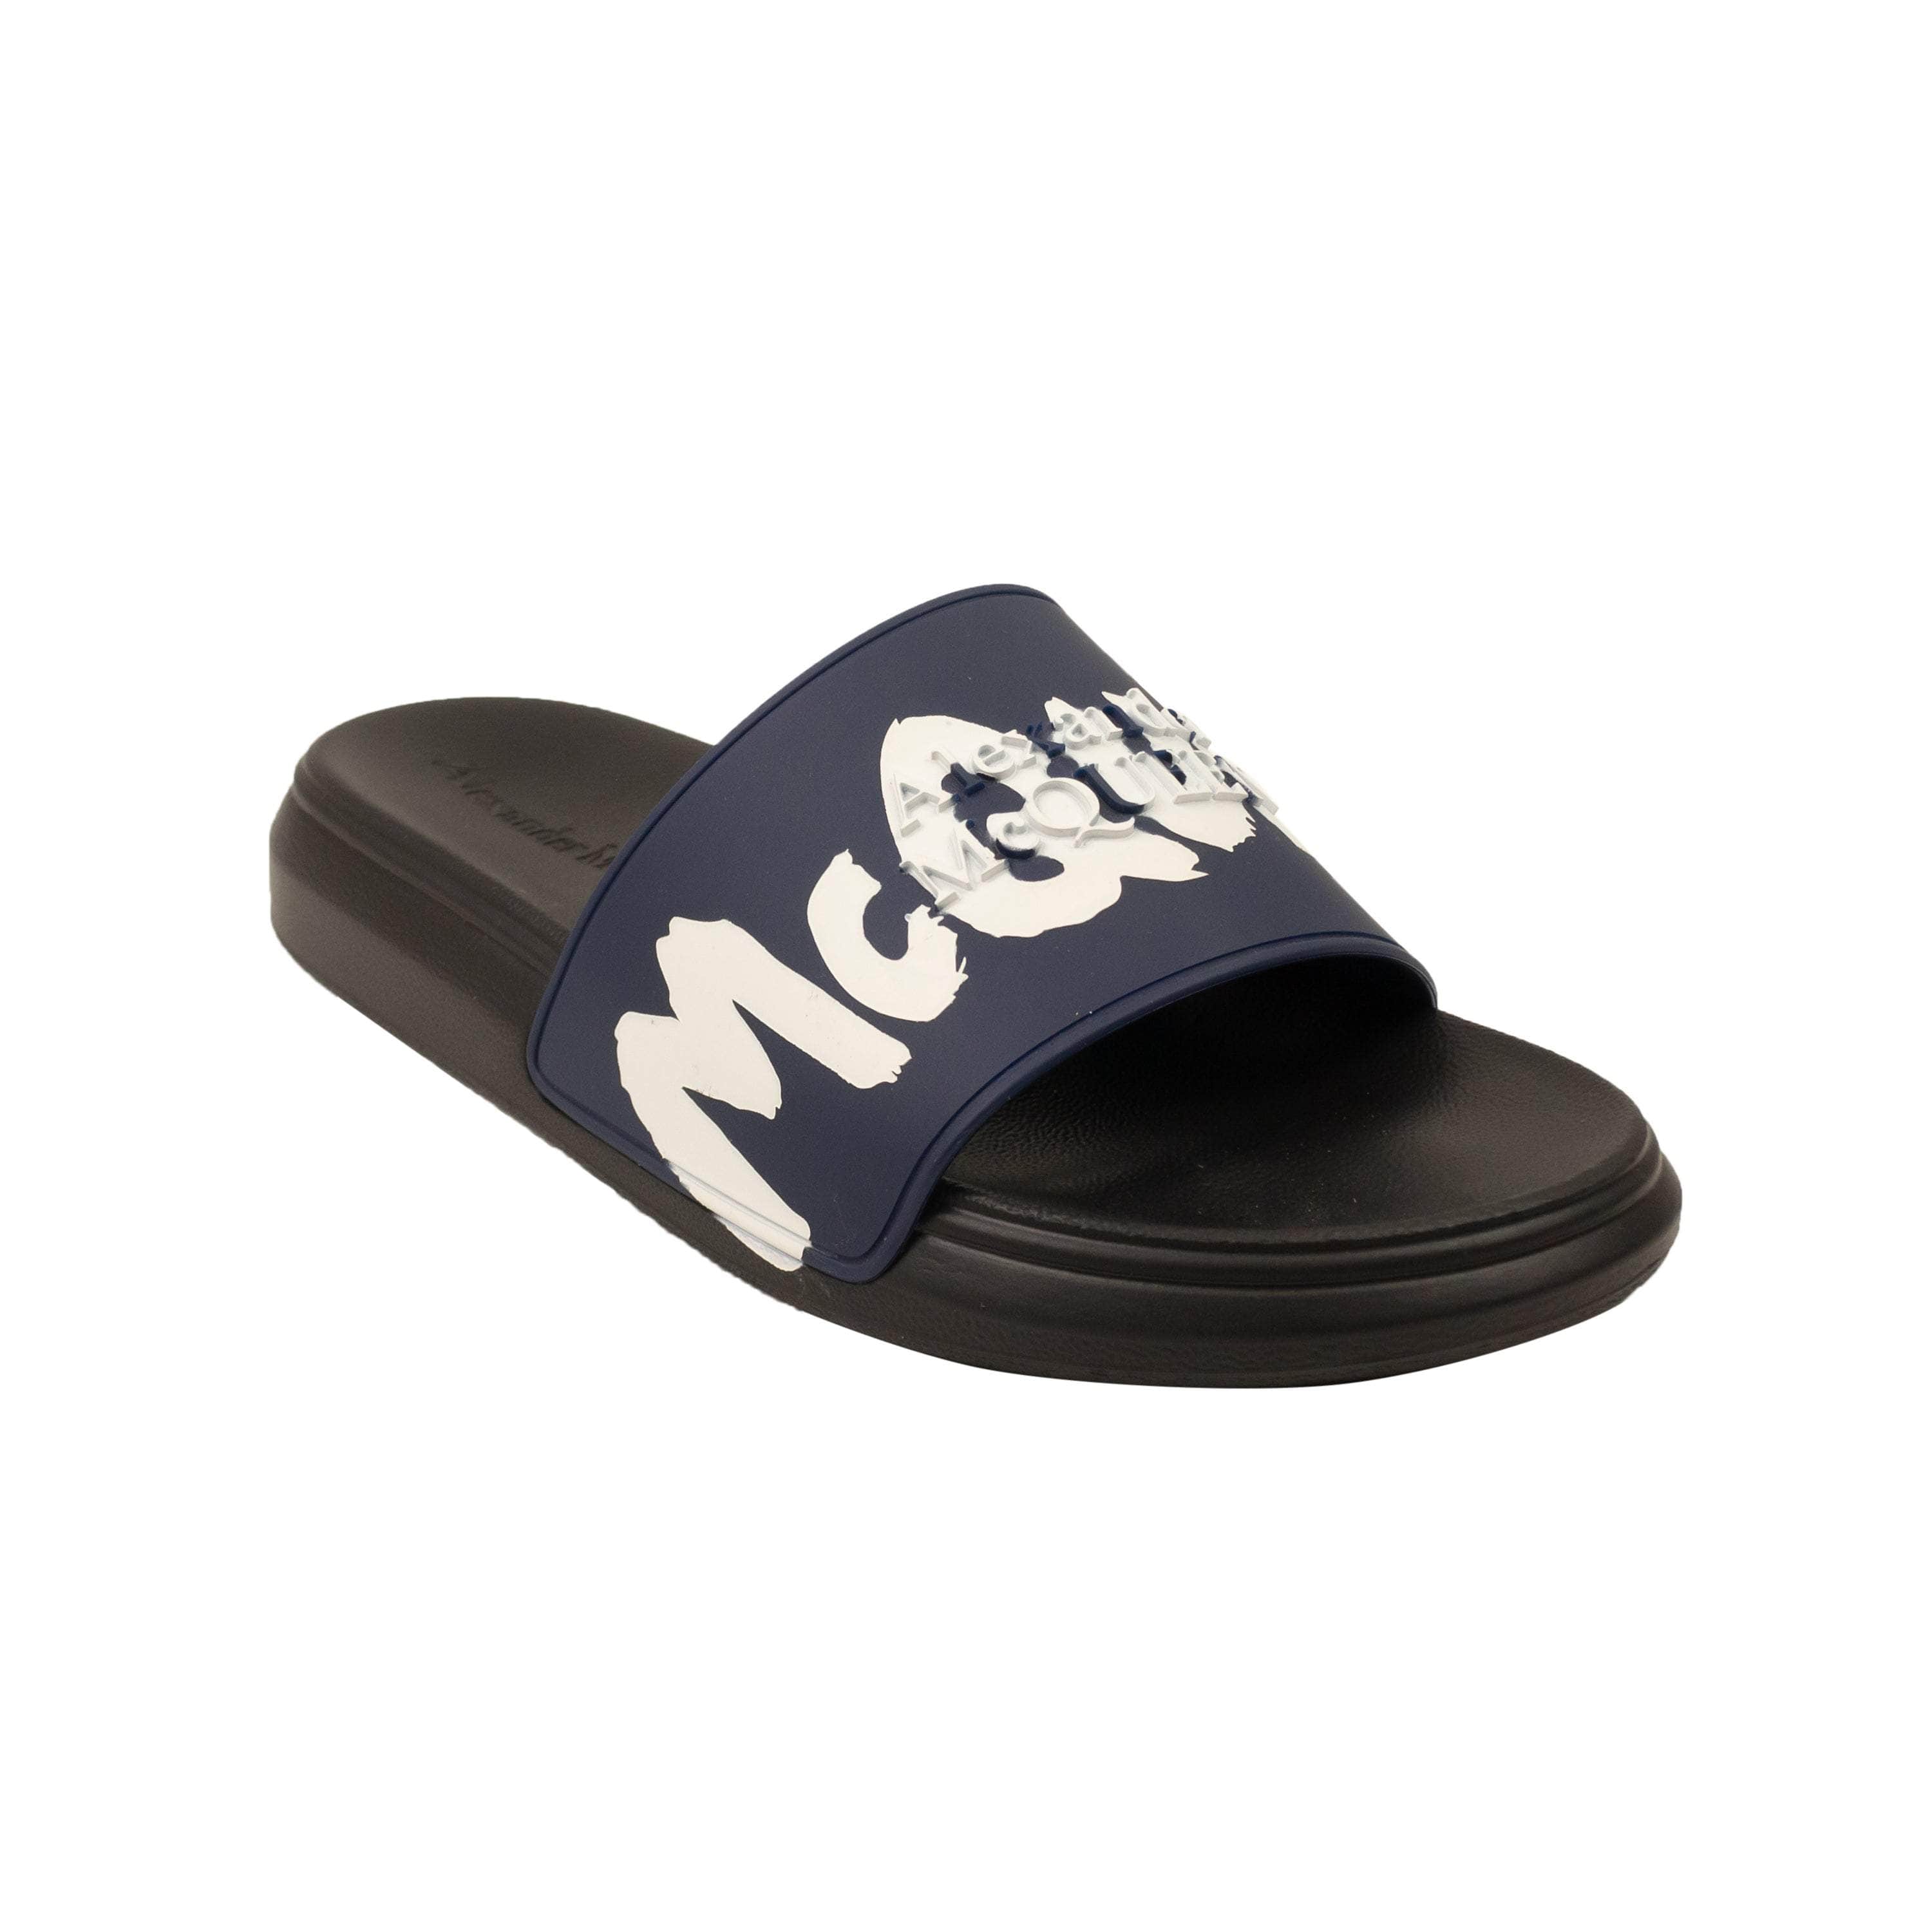 Alexander McQueen 250-500, alexander-mcqueen, channelenable-all, chicmi, couponcollection, gender-mens, main-shoes, mens-shoes, mens-slides-slippers, size-40, size-41, size-44-5, size-45 Black And Navy Graffiti Logo Pool Slides